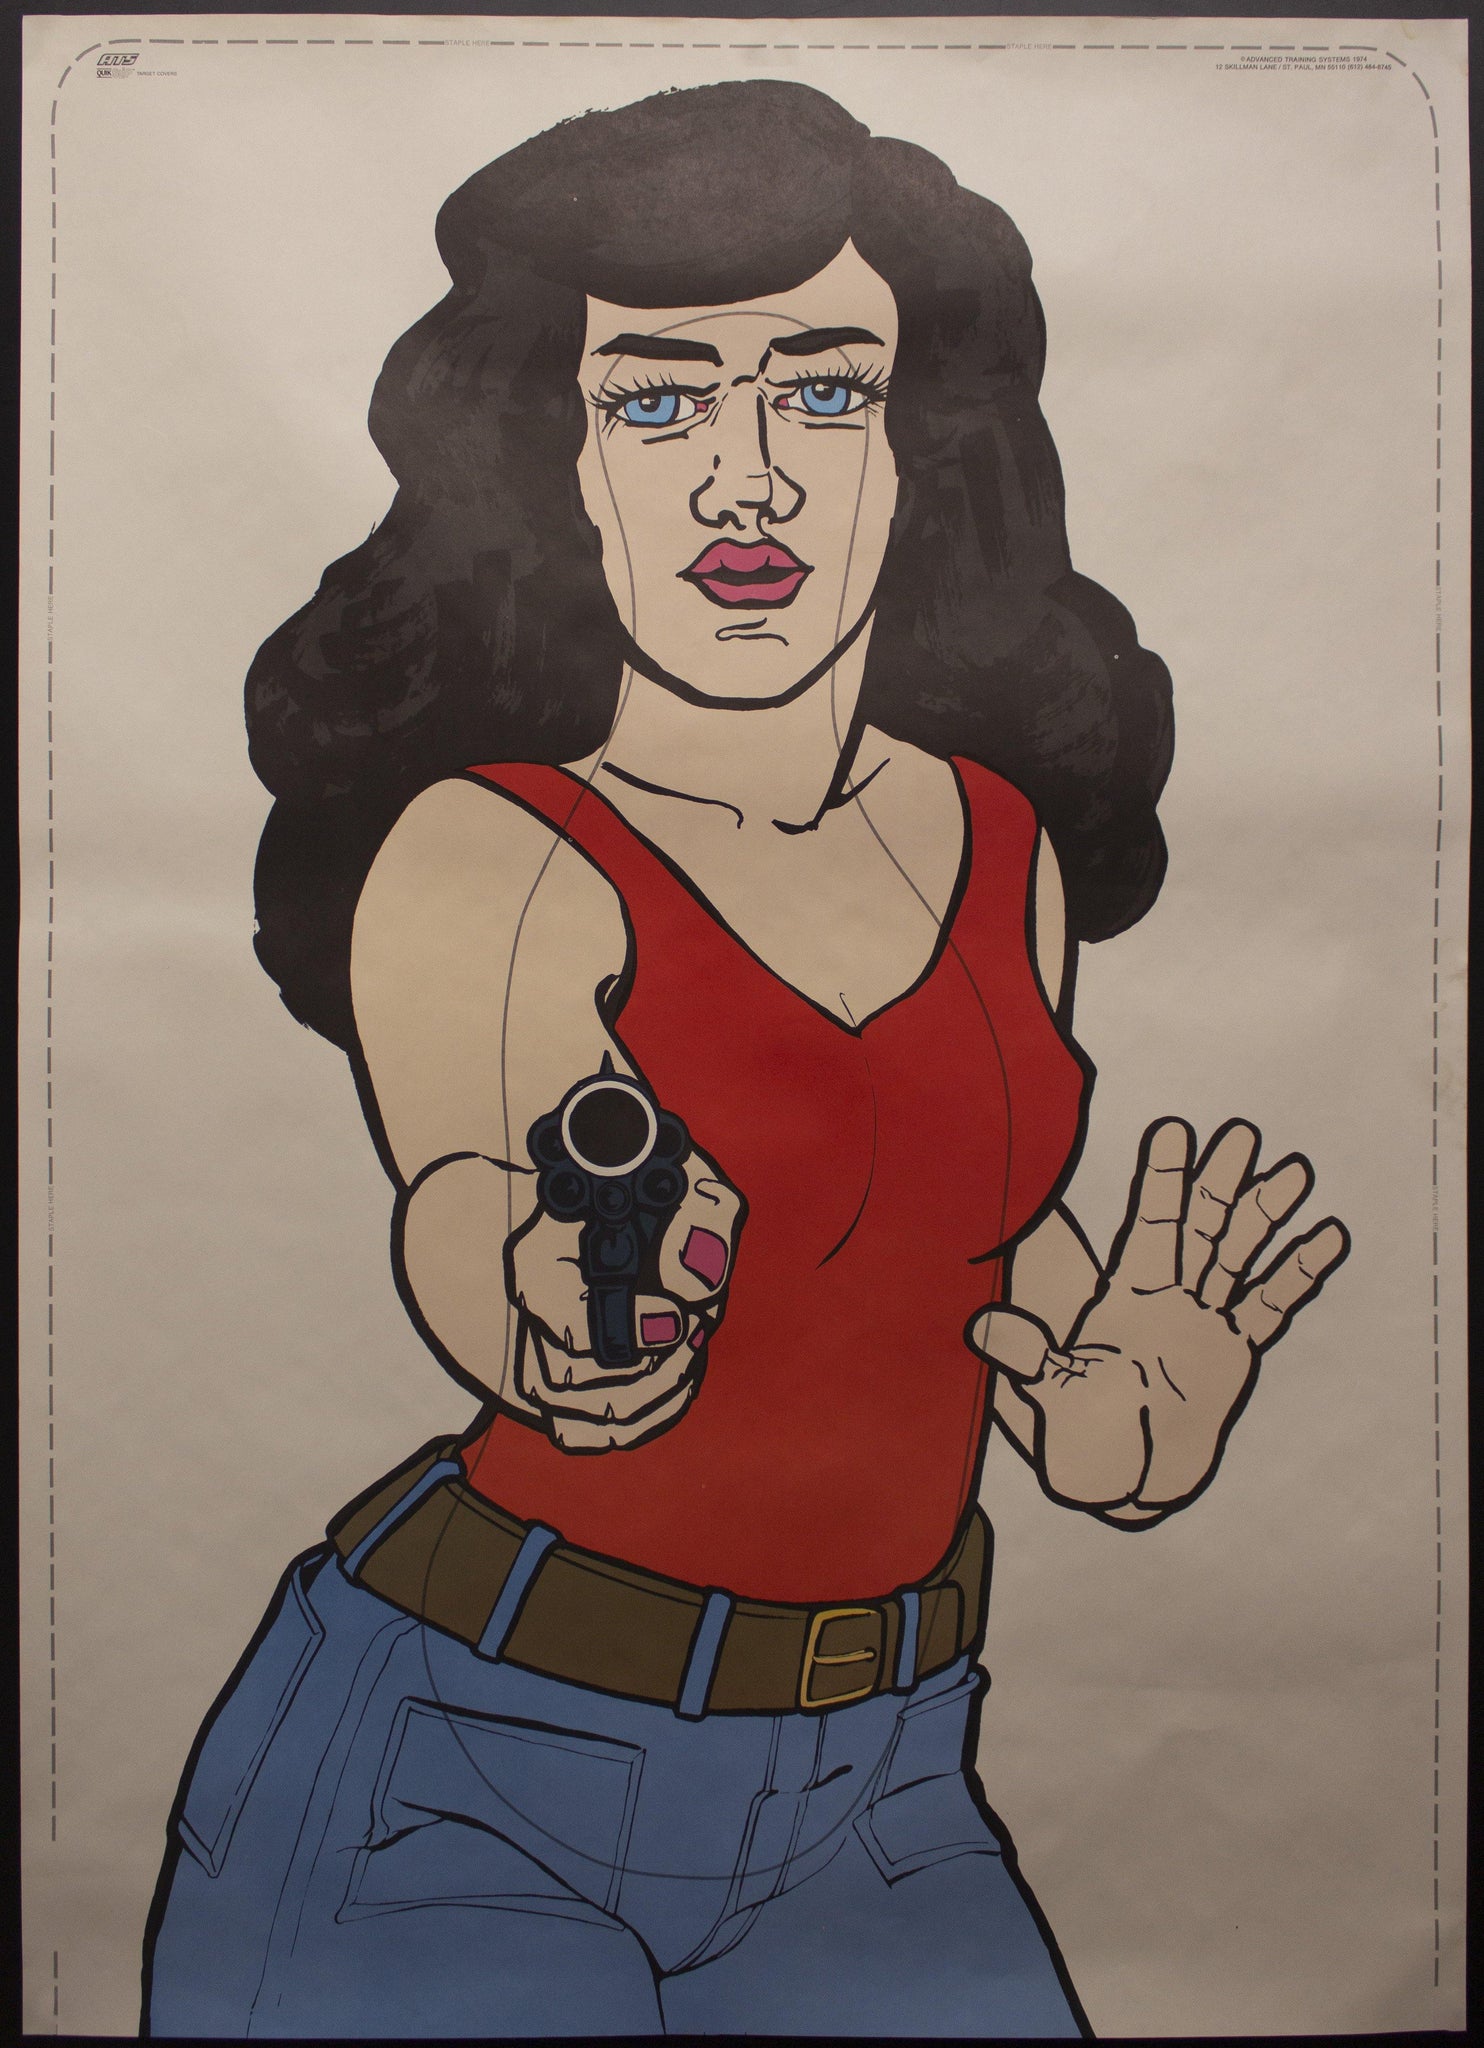 1974 ATS Quik Slip Human Figure Police Target Poster Bad Lady with Gun - Golden Age Posters